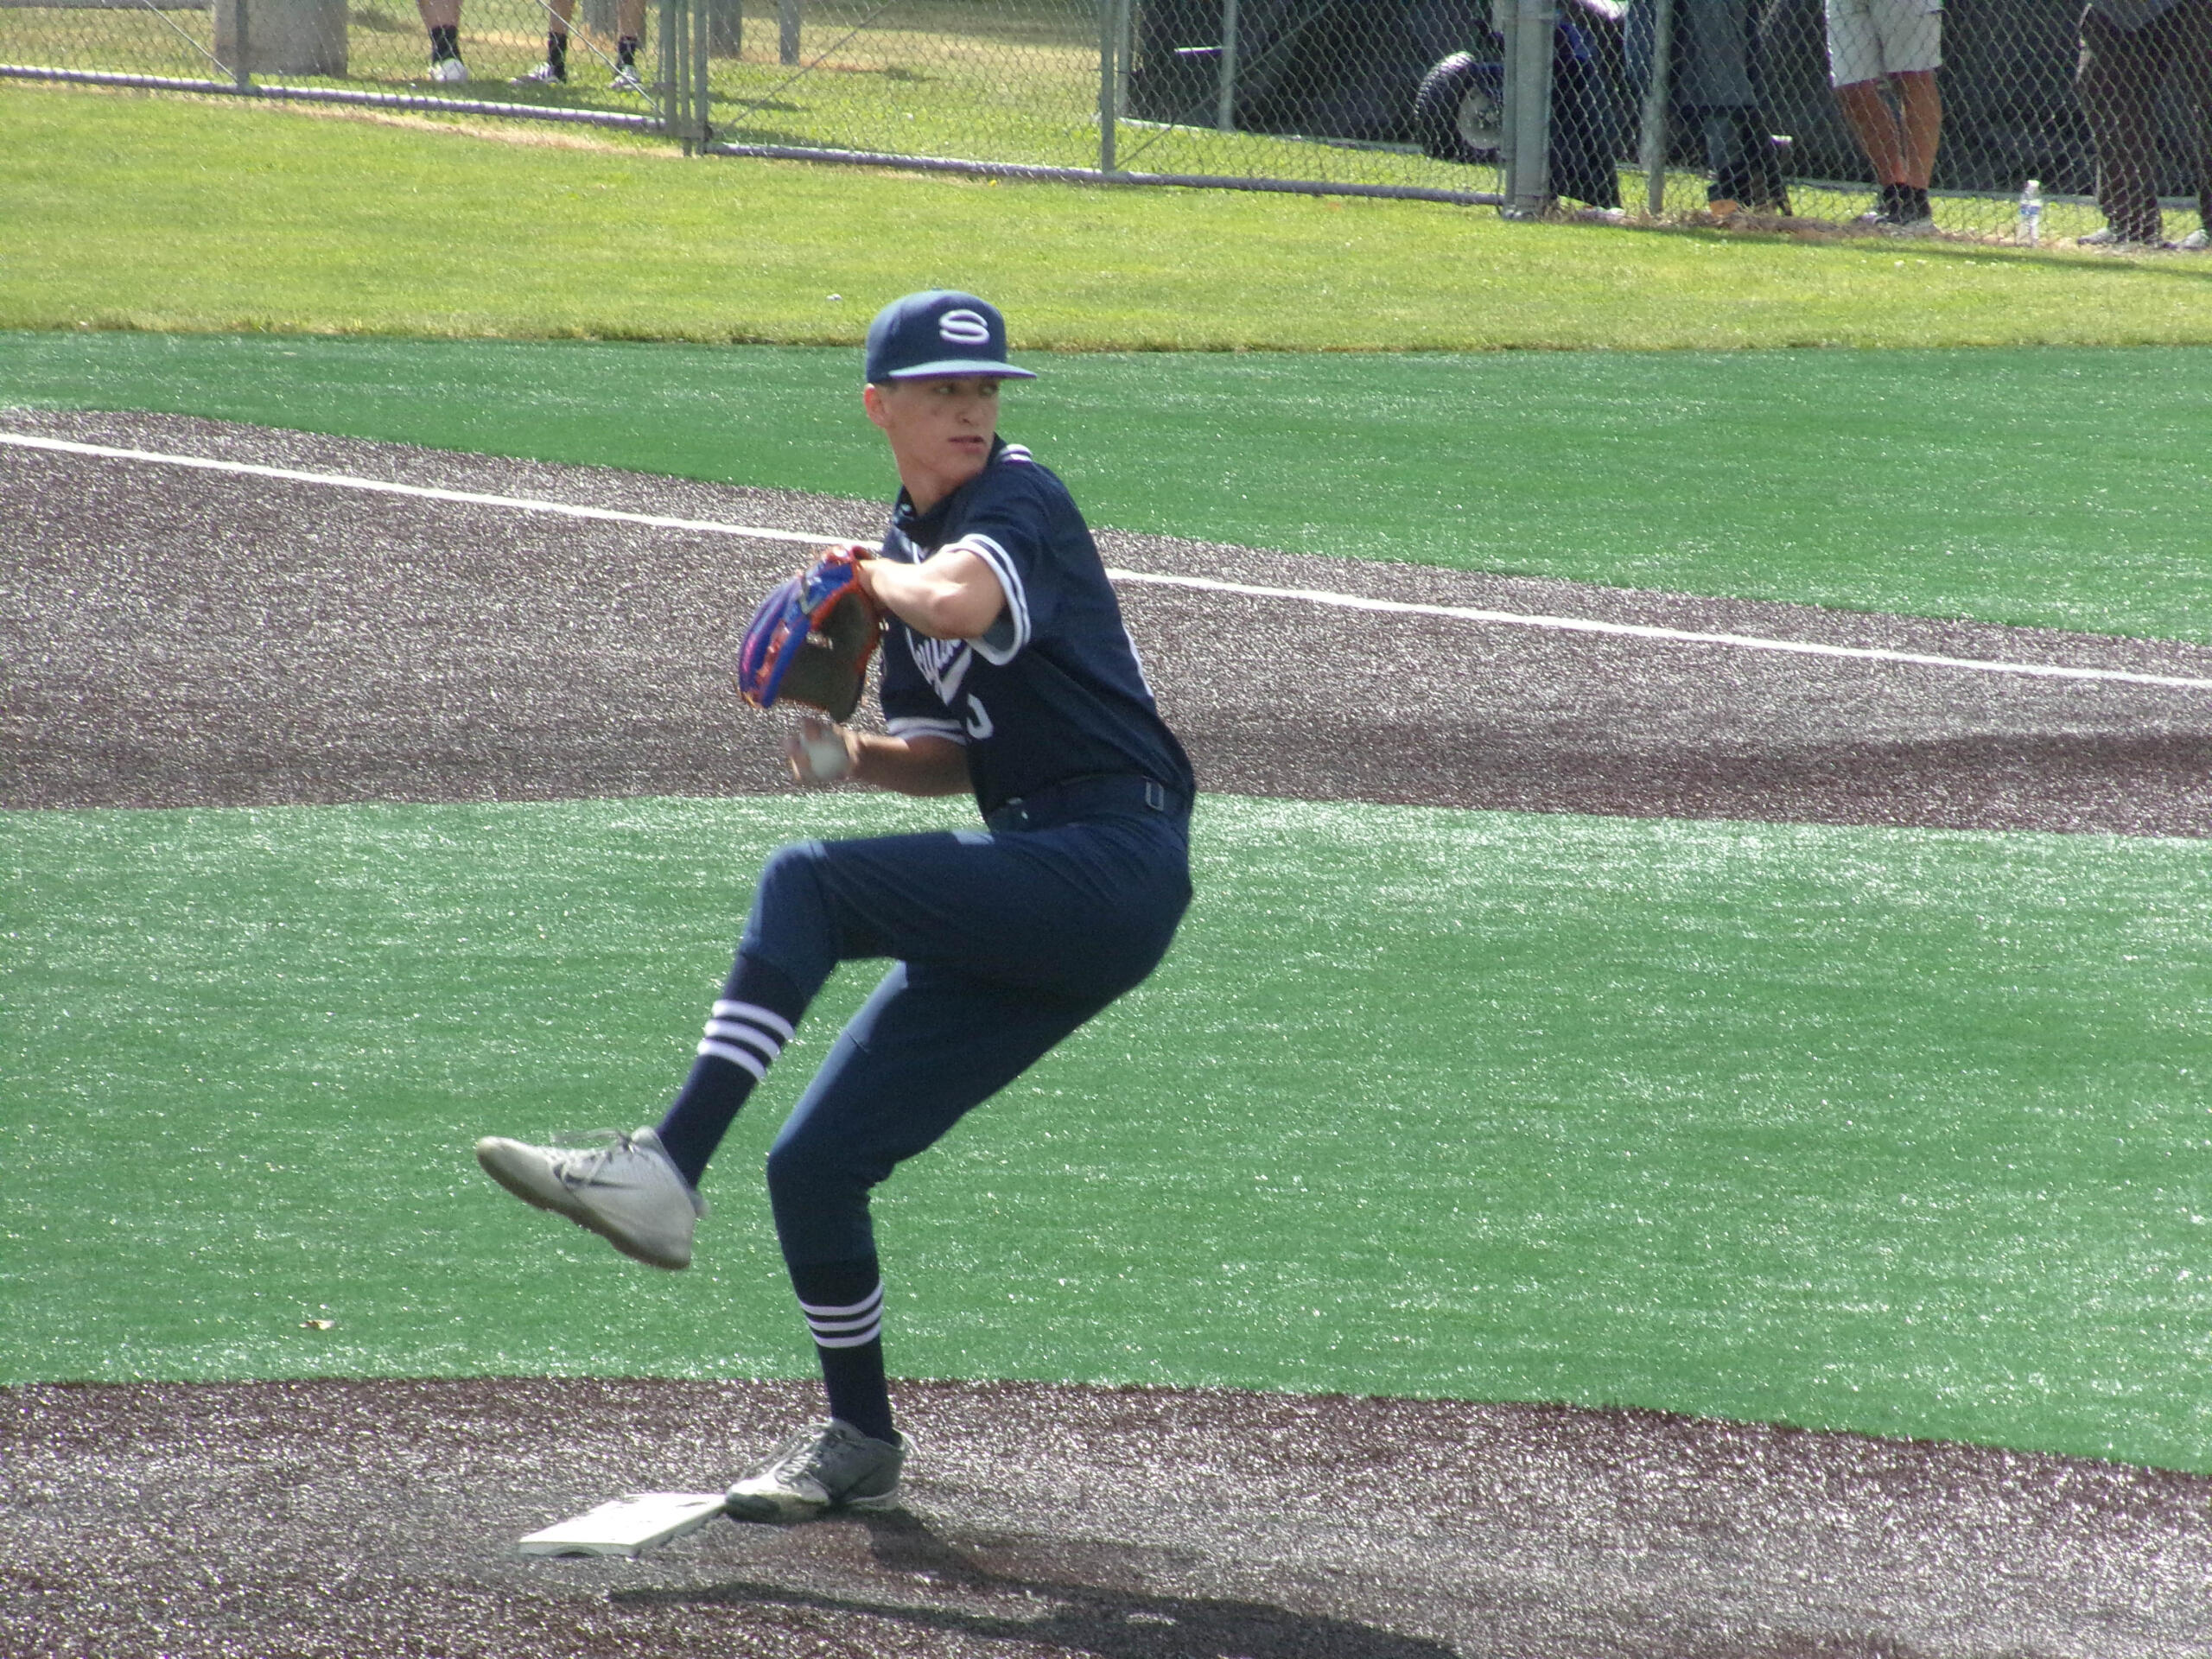 Brendan Bowyer pitched six innings, allowing three runs and striking out six in Skyview's 8-3 win over Prairie in the 4A/3A Greater St.